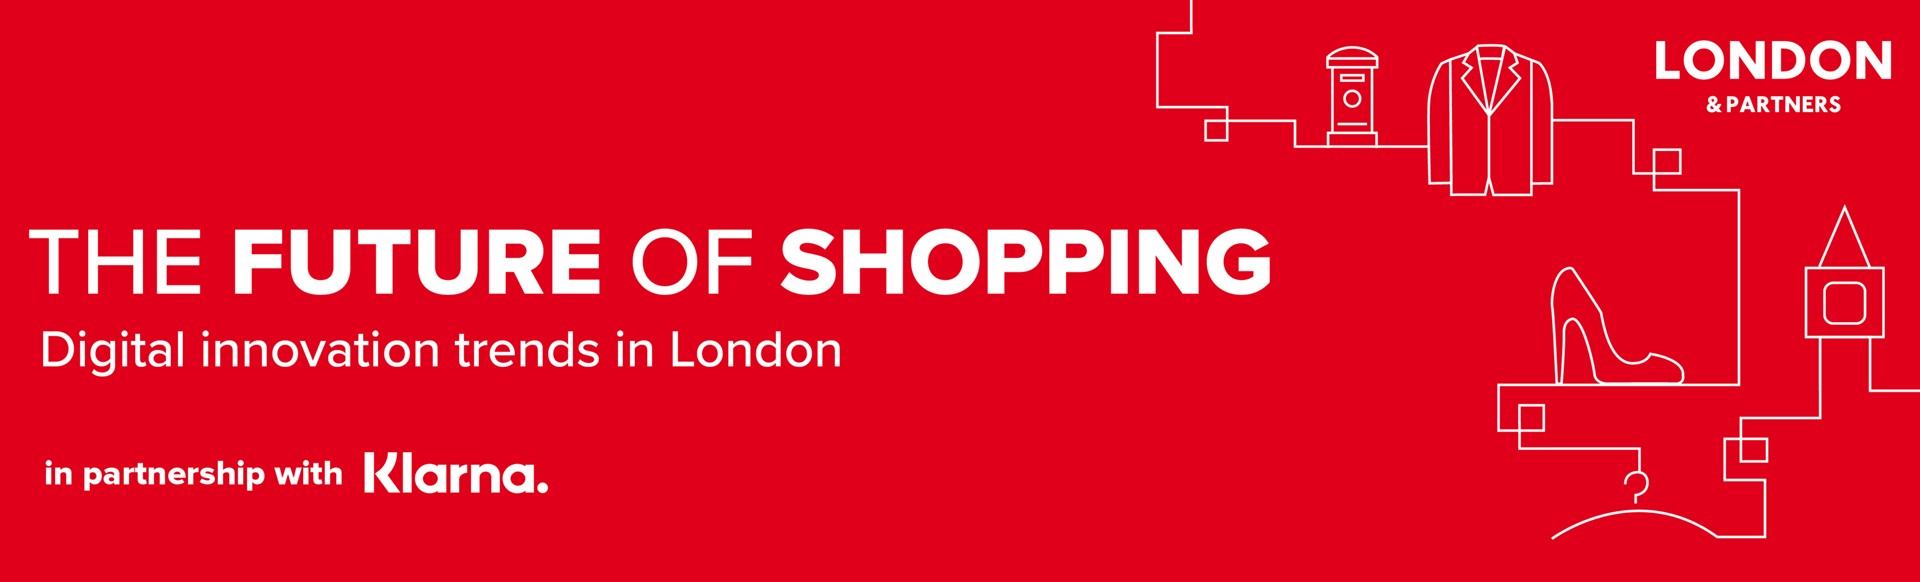 A red background with white text that reads The Future of Shopping, digital innovation trends in London, in partnership with Klarna